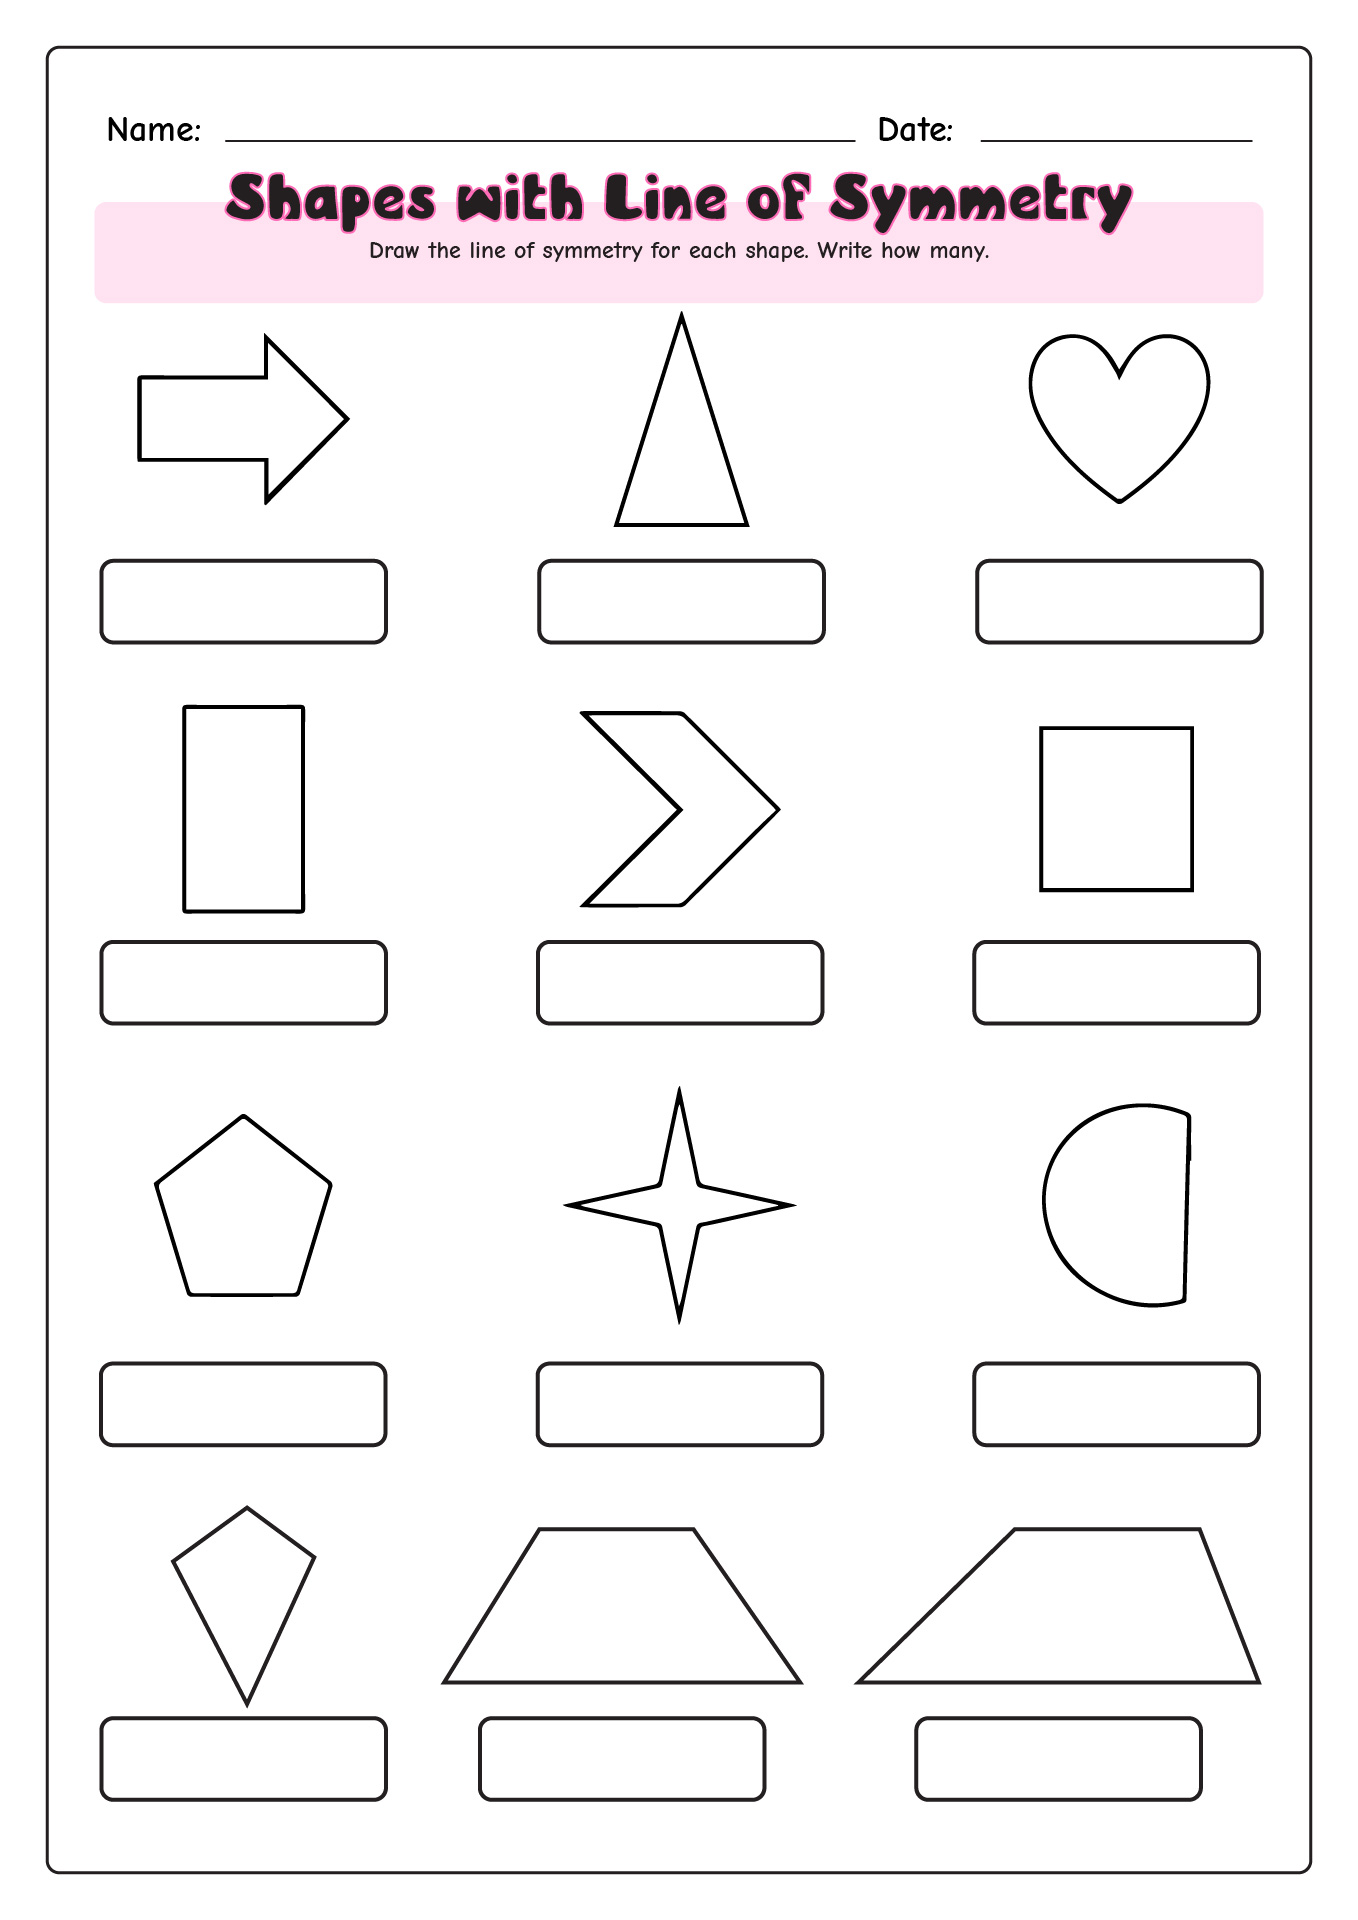 Shapes with Lines of Symmetry Worksheet